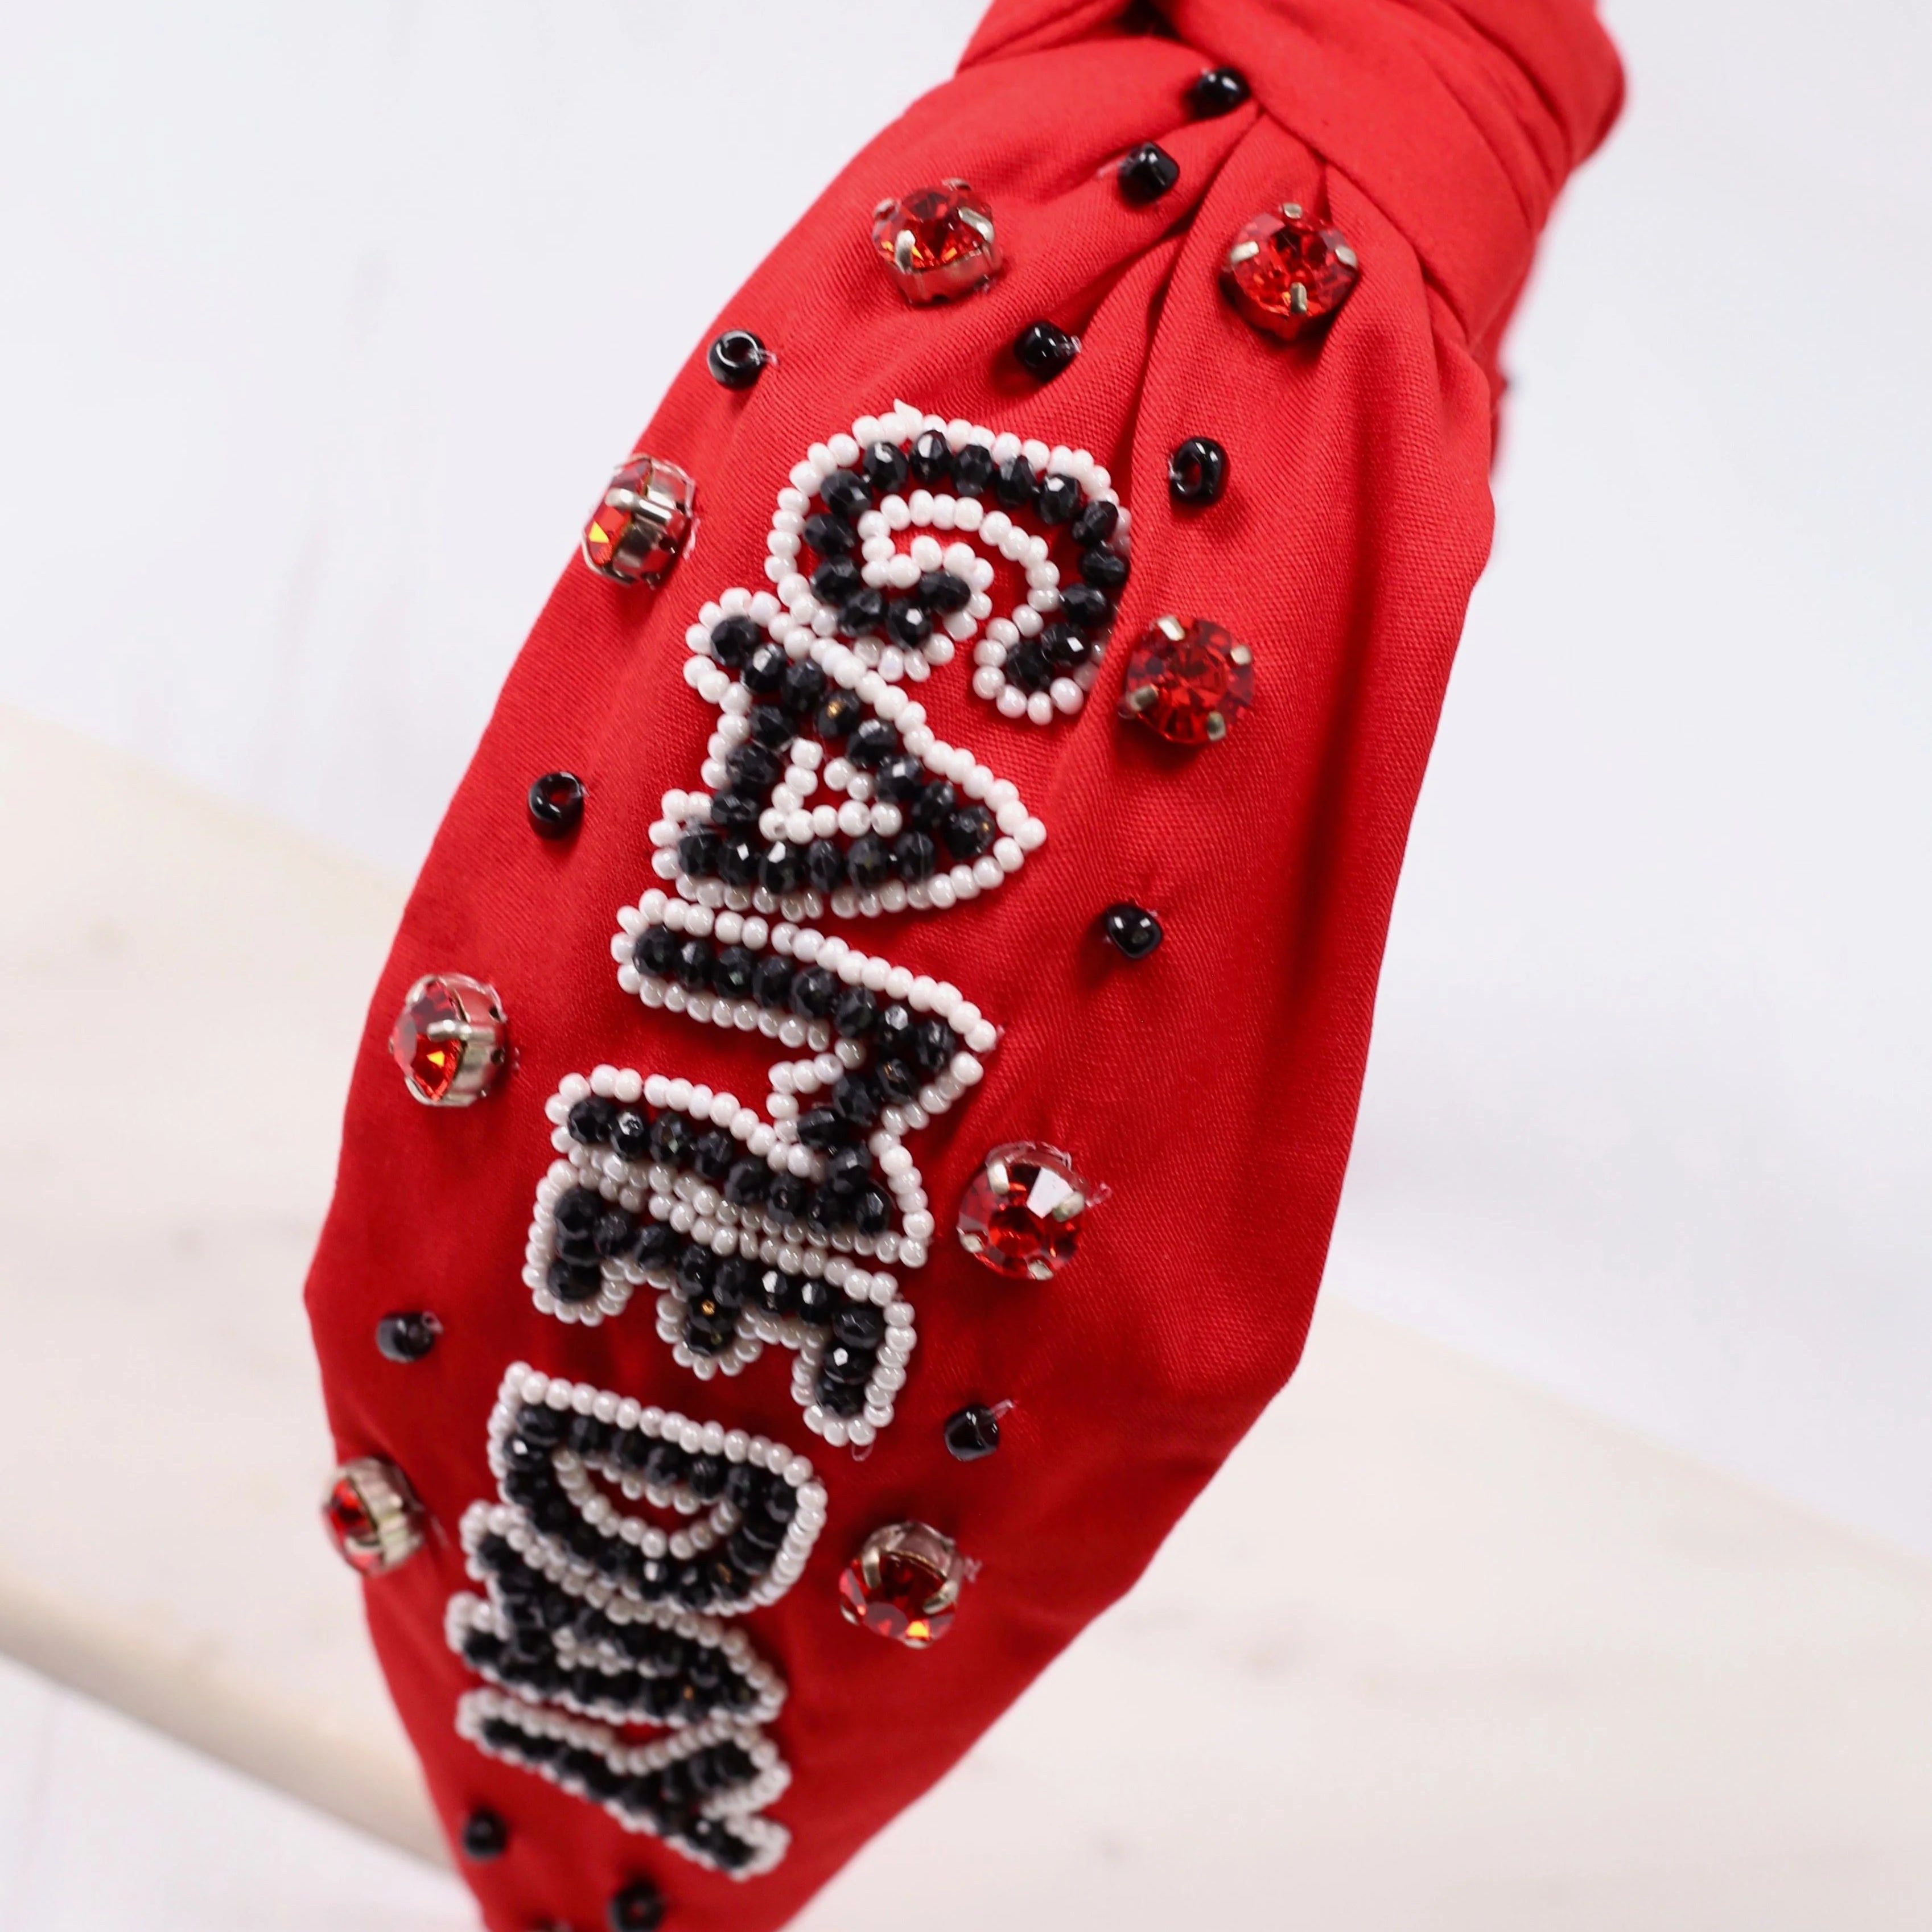 Gameday Embellished Headband - Red, Black & White-Headbands-LouisGeorge Boutique-LouisGeorge Boutique, Women’s Fashion Boutique Located in Trussville, Alabama